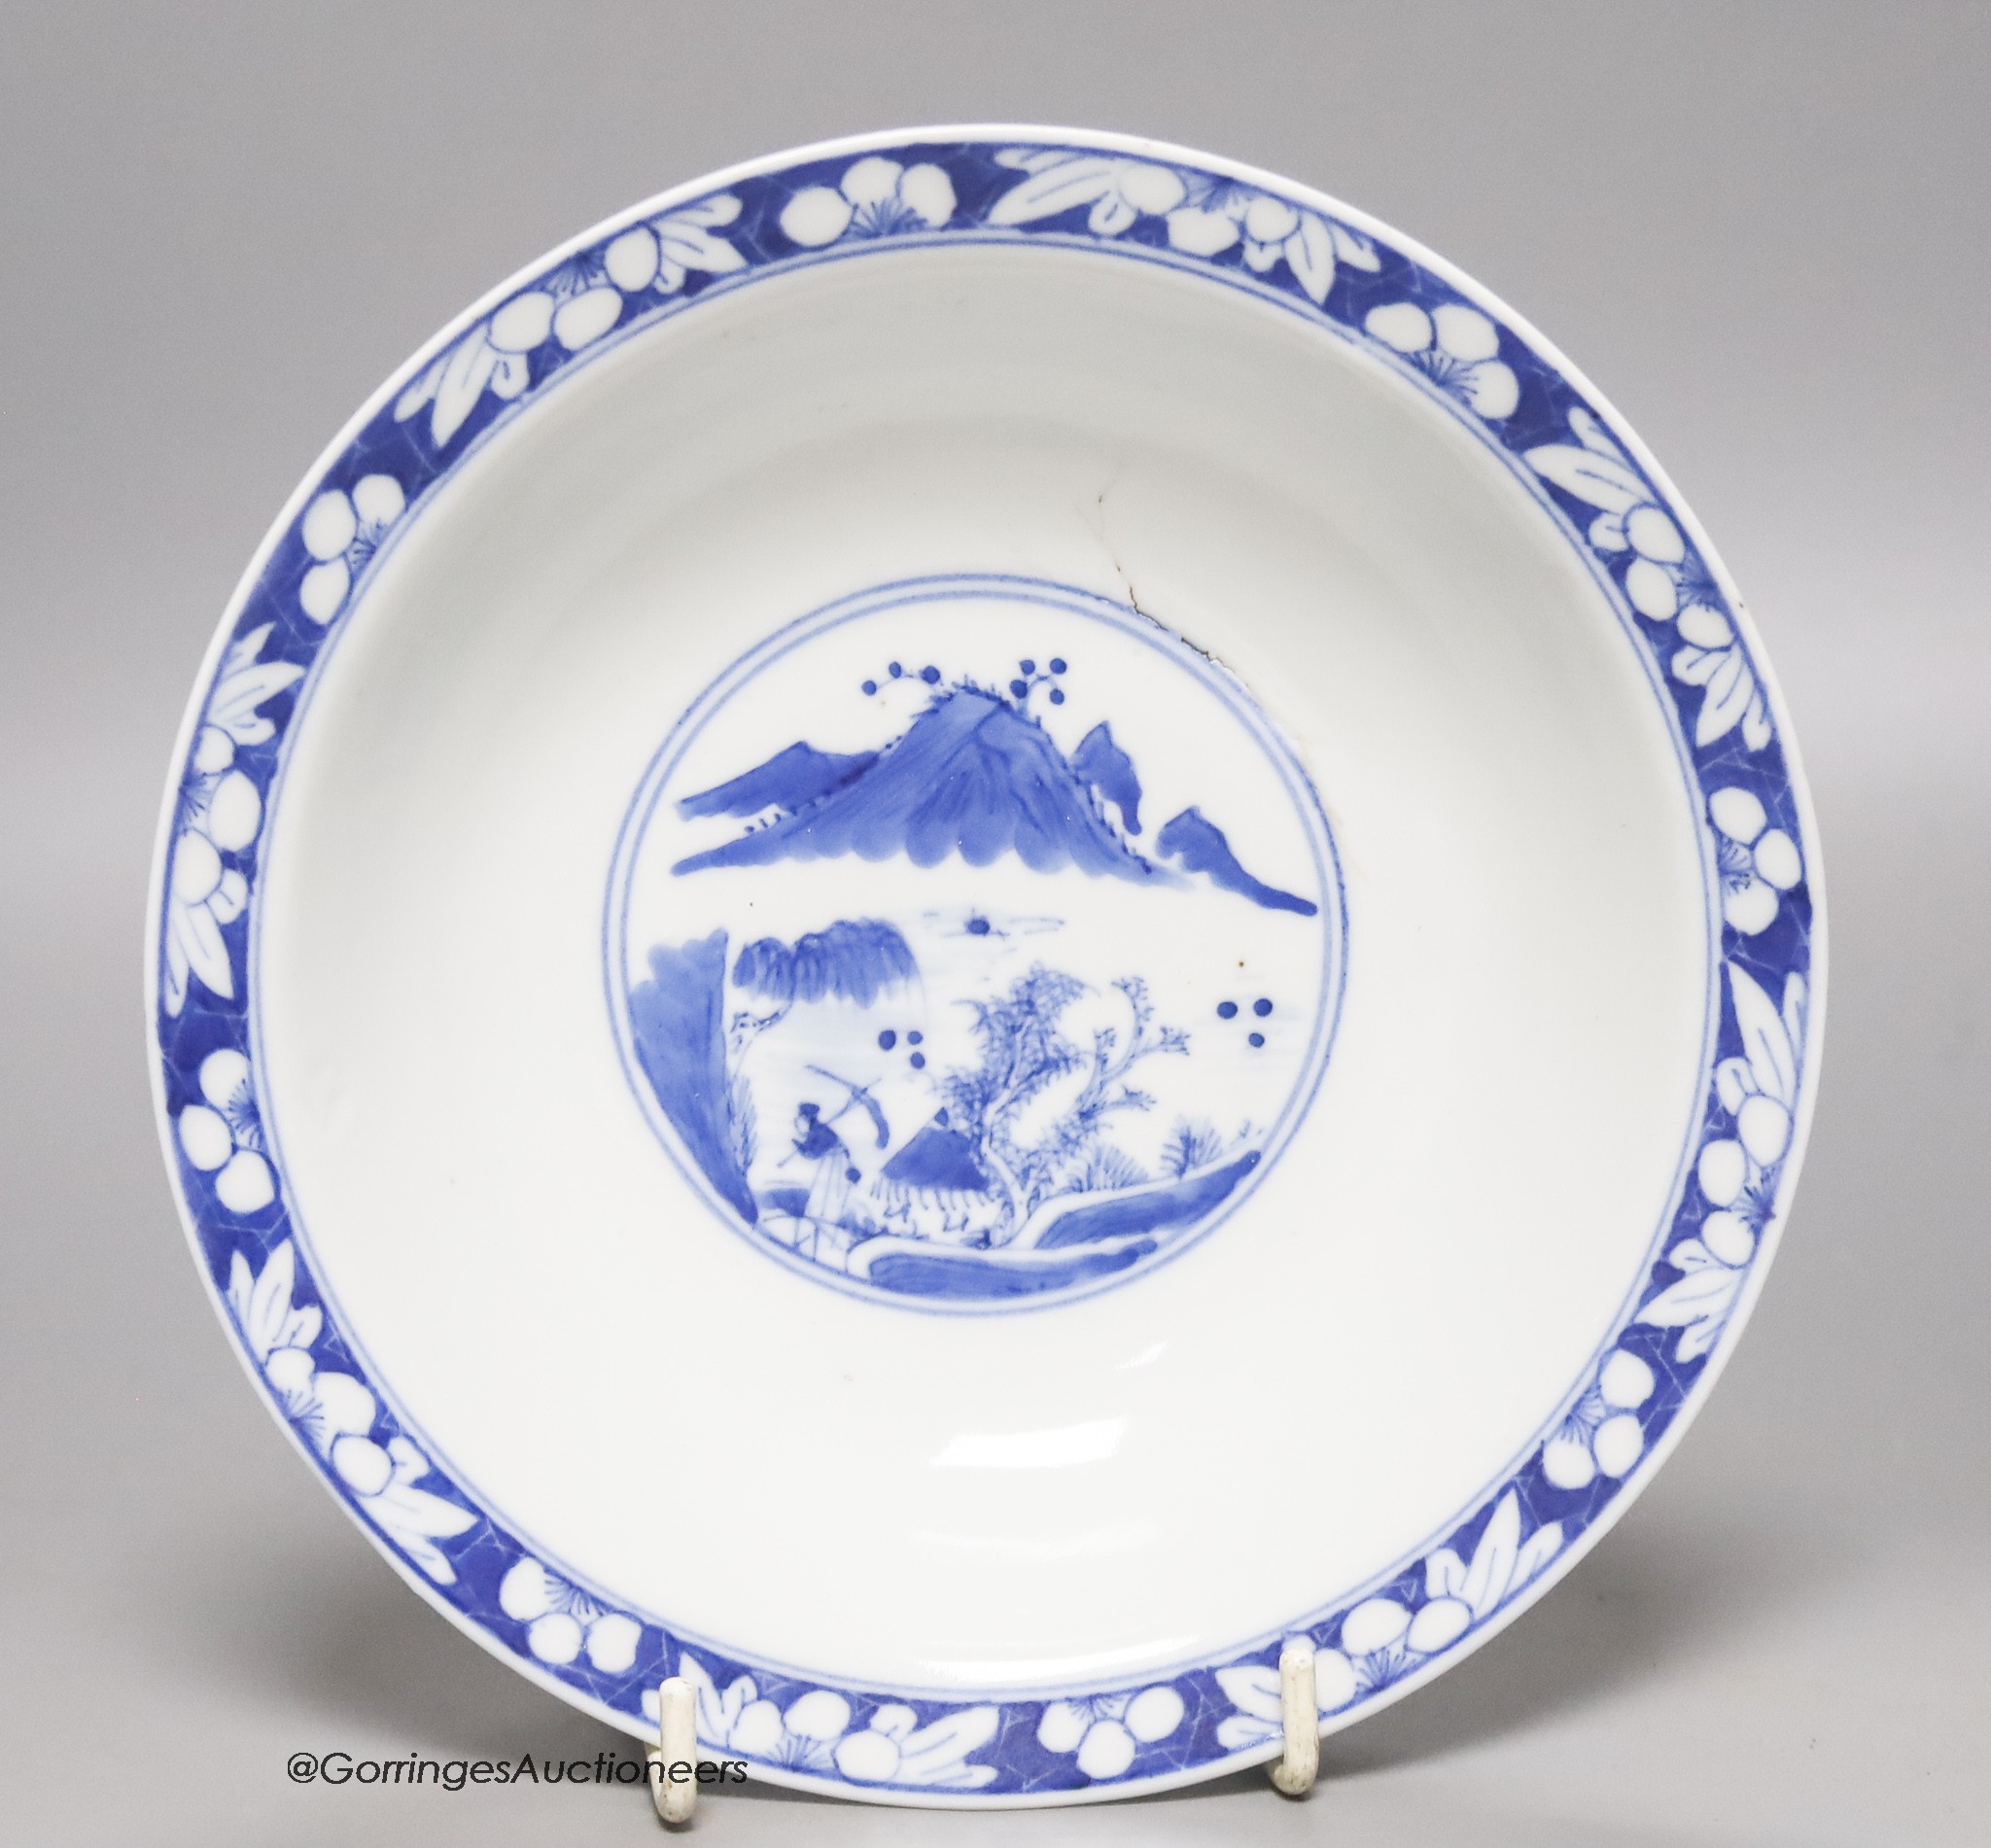 A Chinese blue and white porcelain dish circa 1900, 19 cm 18.5cm